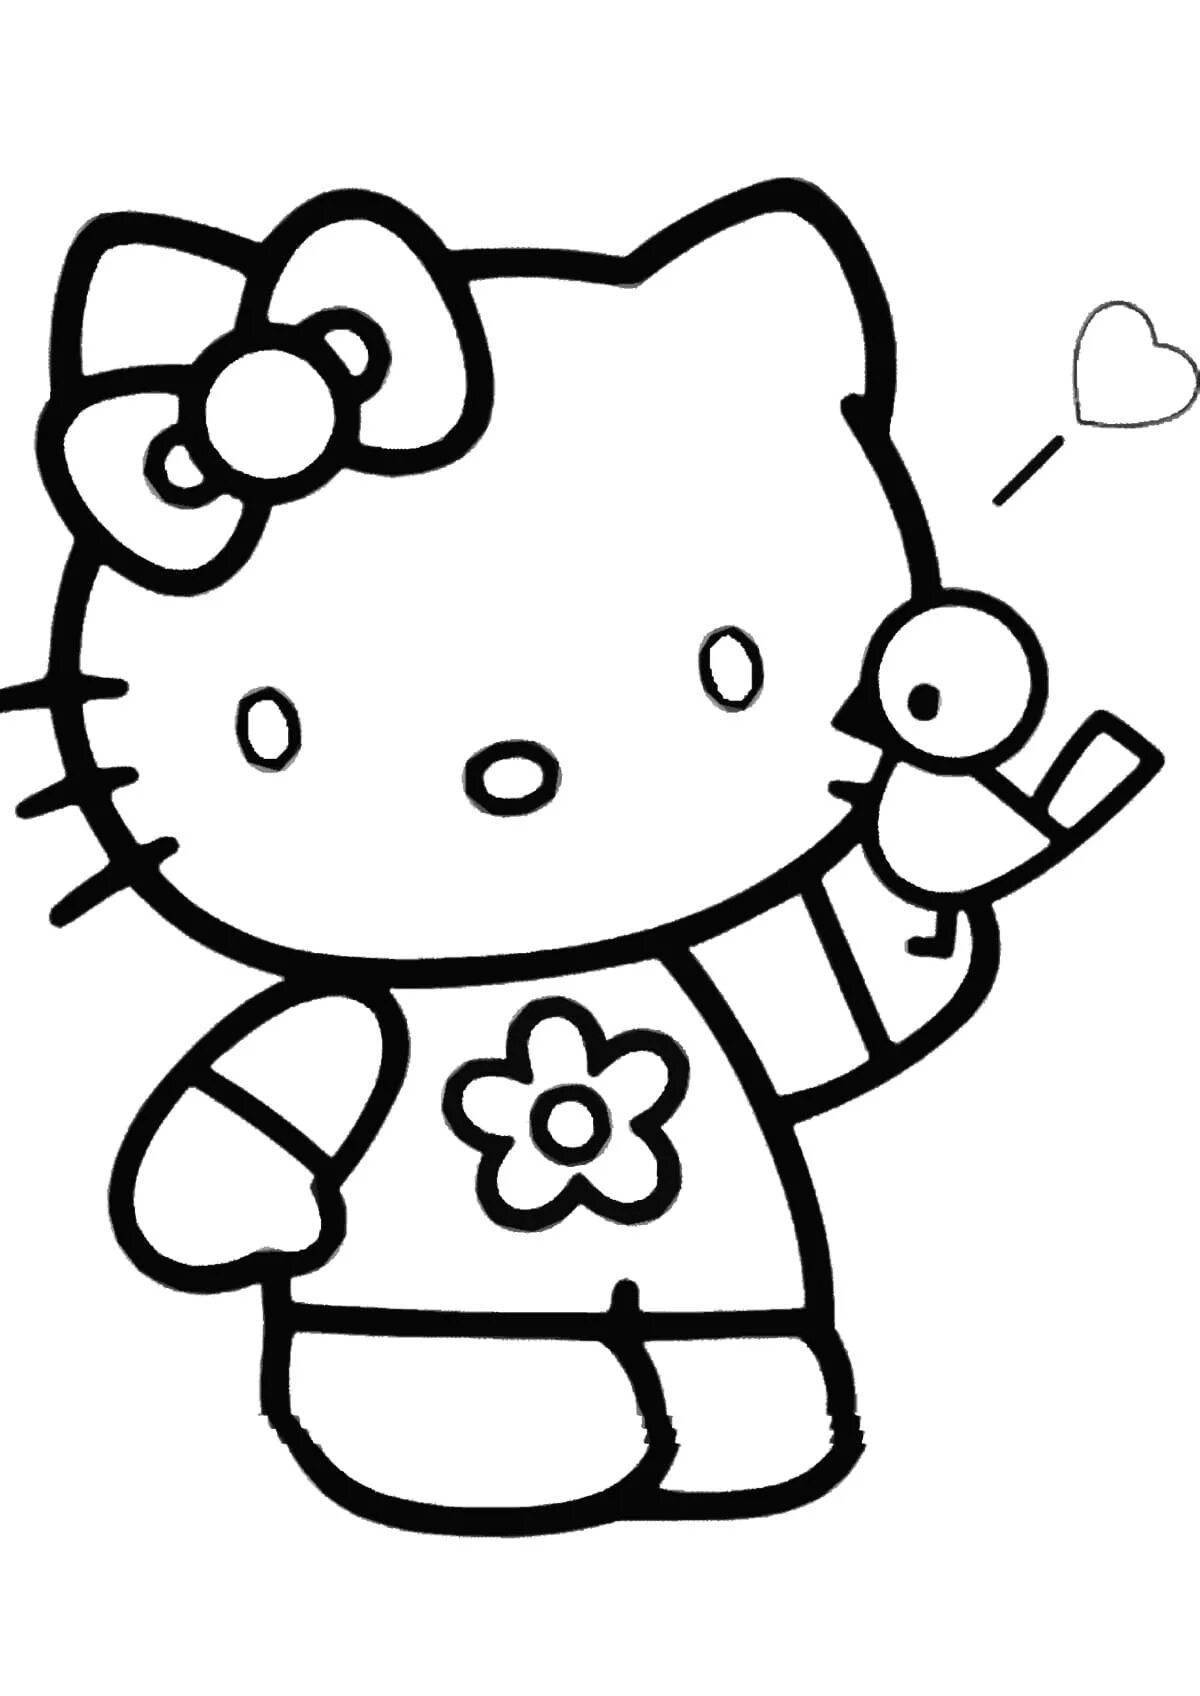 Exquisite little hello kitty coloring book